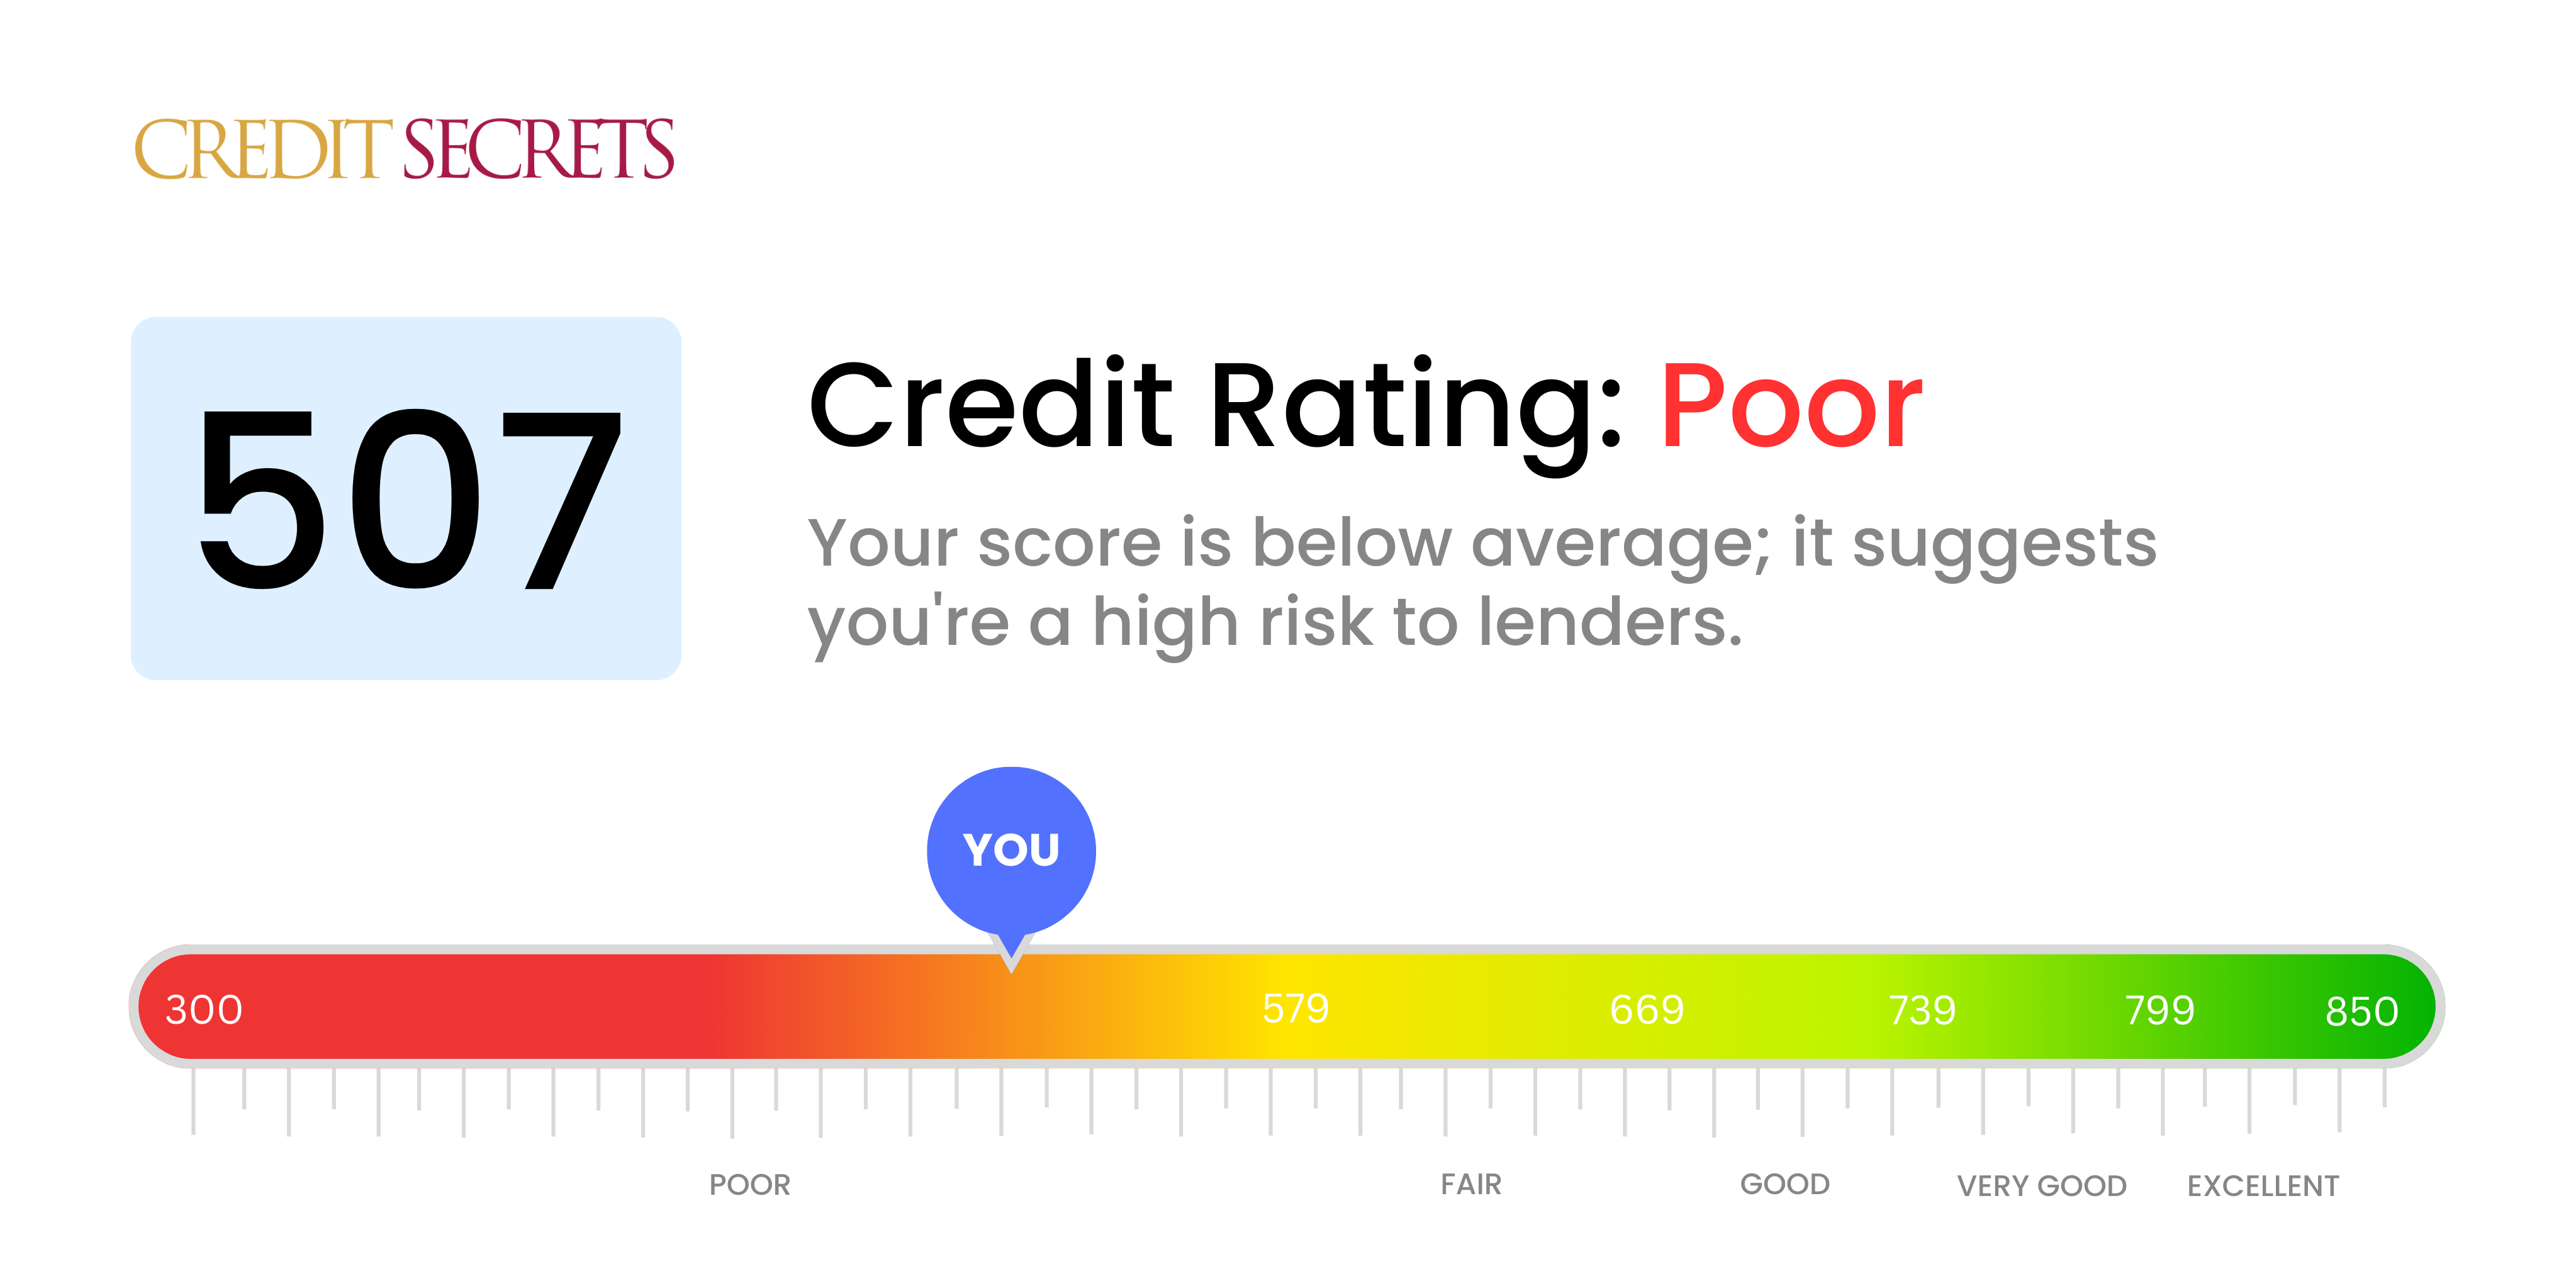 Is 507 a good credit score?